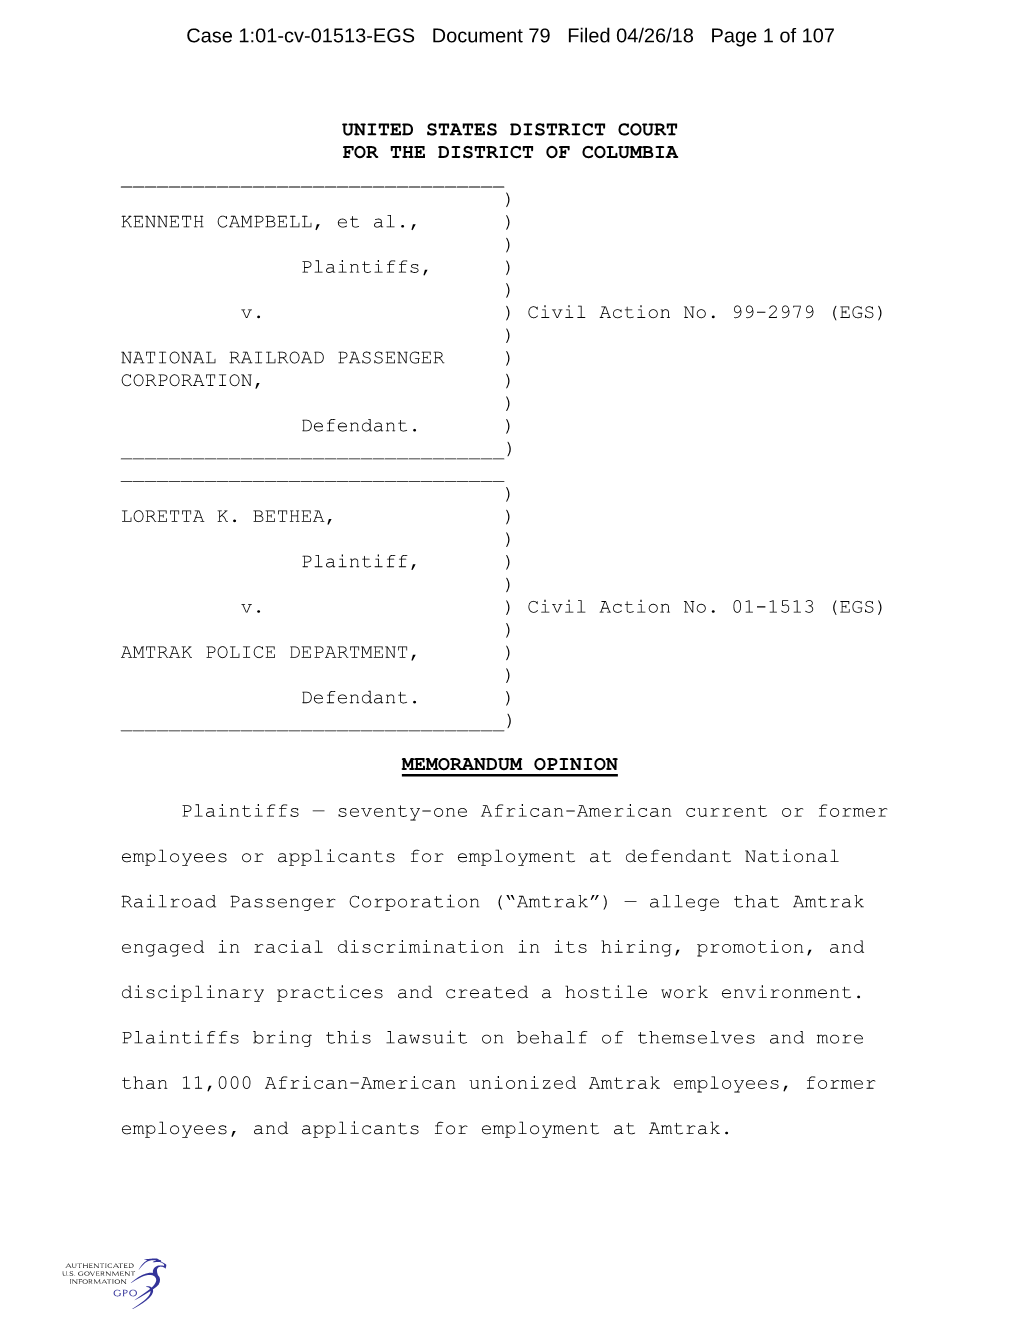 Case 1:01-Cv-01513-EGS Document 79 Filed 04/26/18 Page 1 of 107